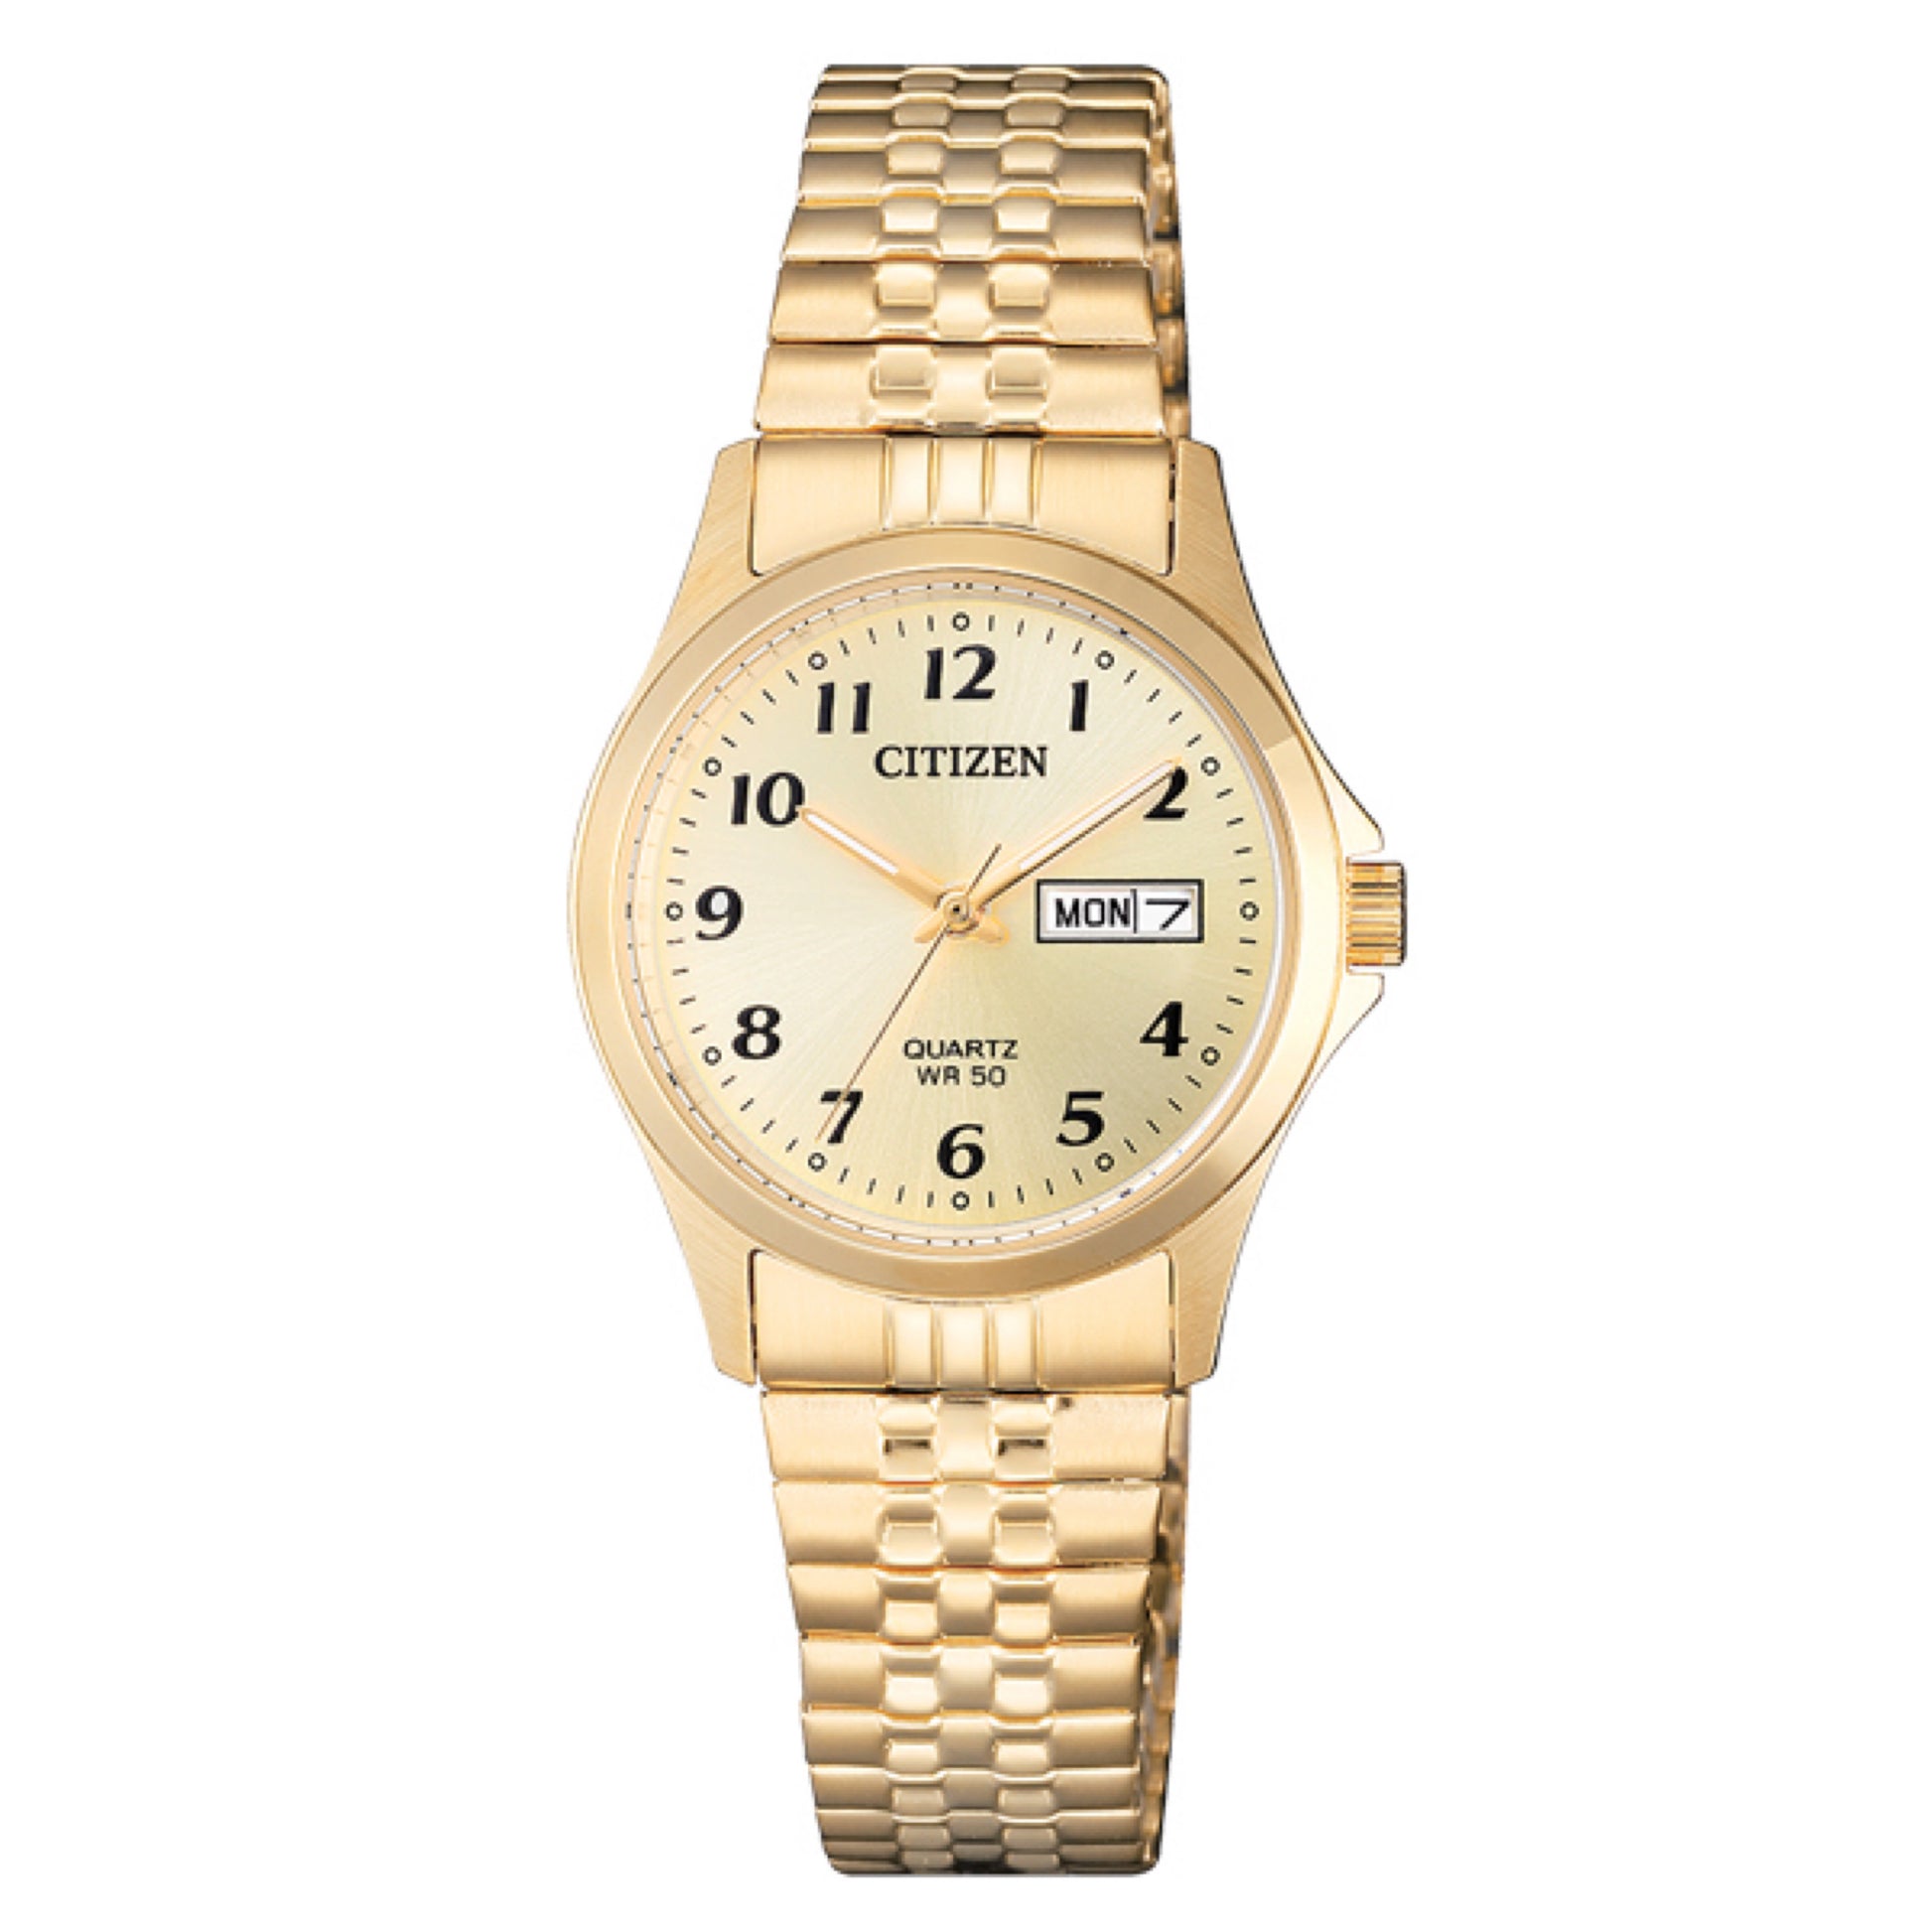 Design and comfort unite in the Citizen Expansion collection, offering timepieces with universal appeal. Key features of this 3-hand analog watch in stainless steel with gold tone include day-date indicator, champagne dial, 28mm case and 50 metre water resistance.